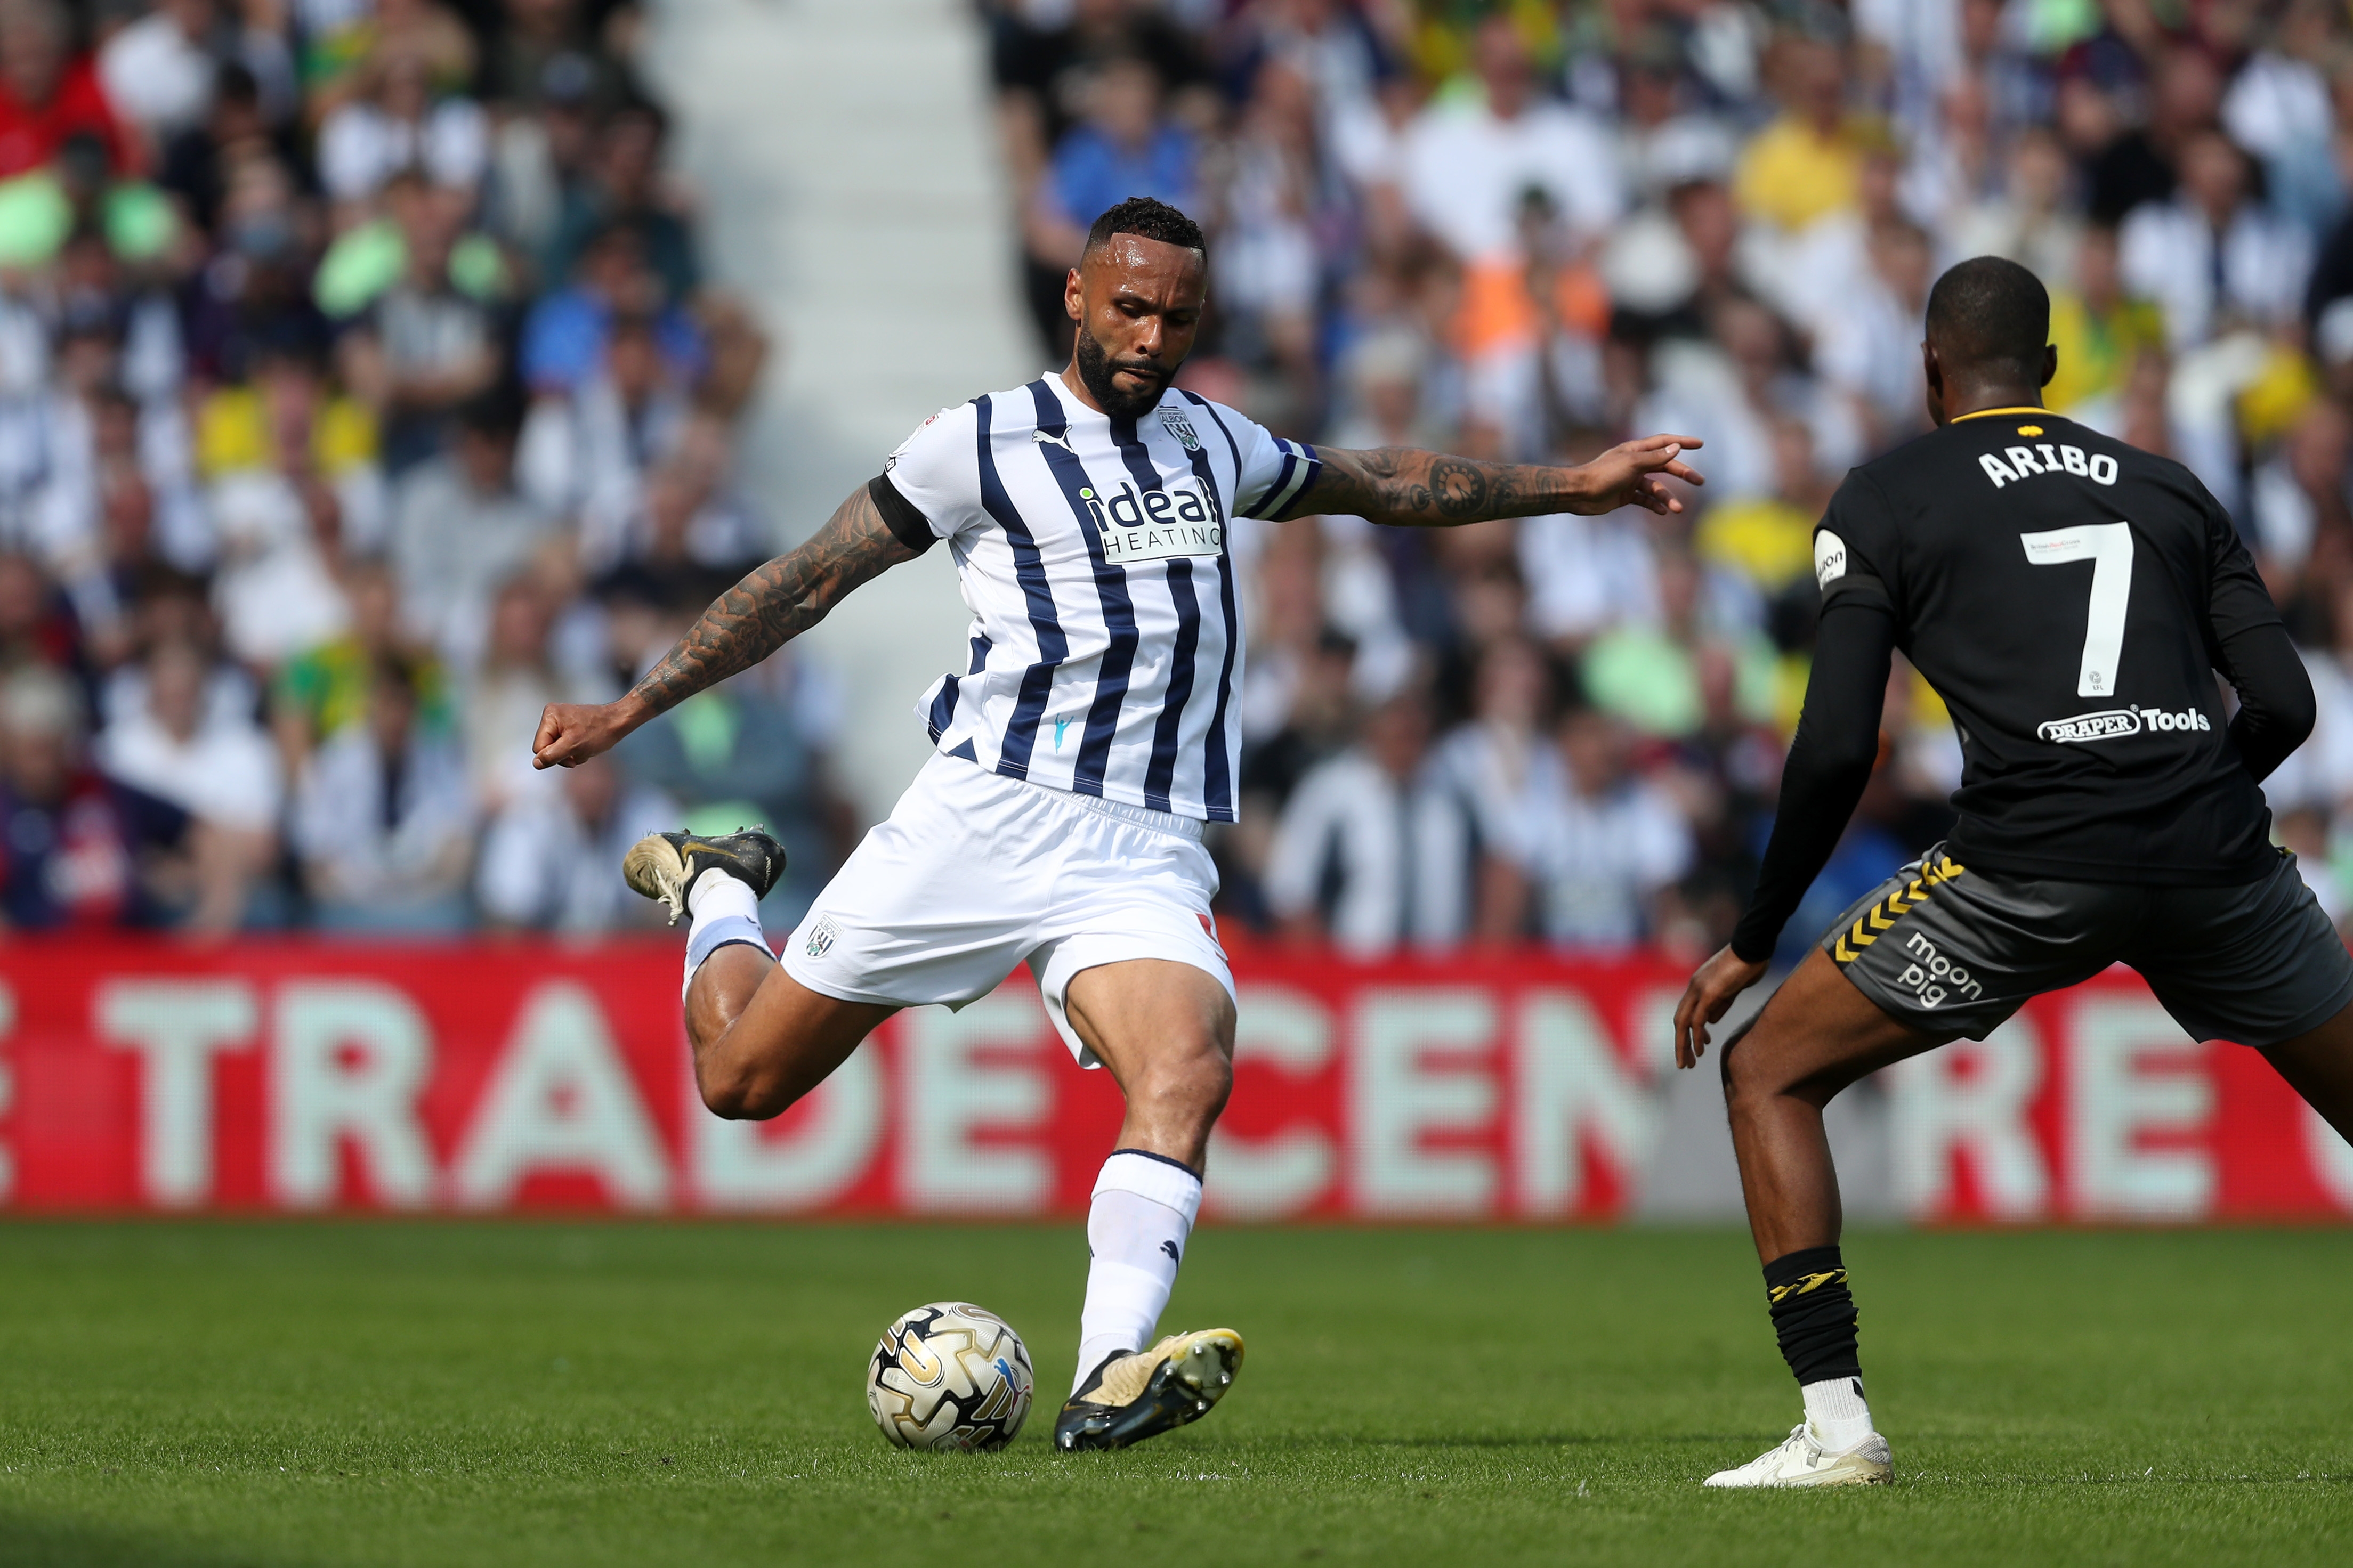 Kyle Bartley striking the ball at The Hawthorns against Southampton 